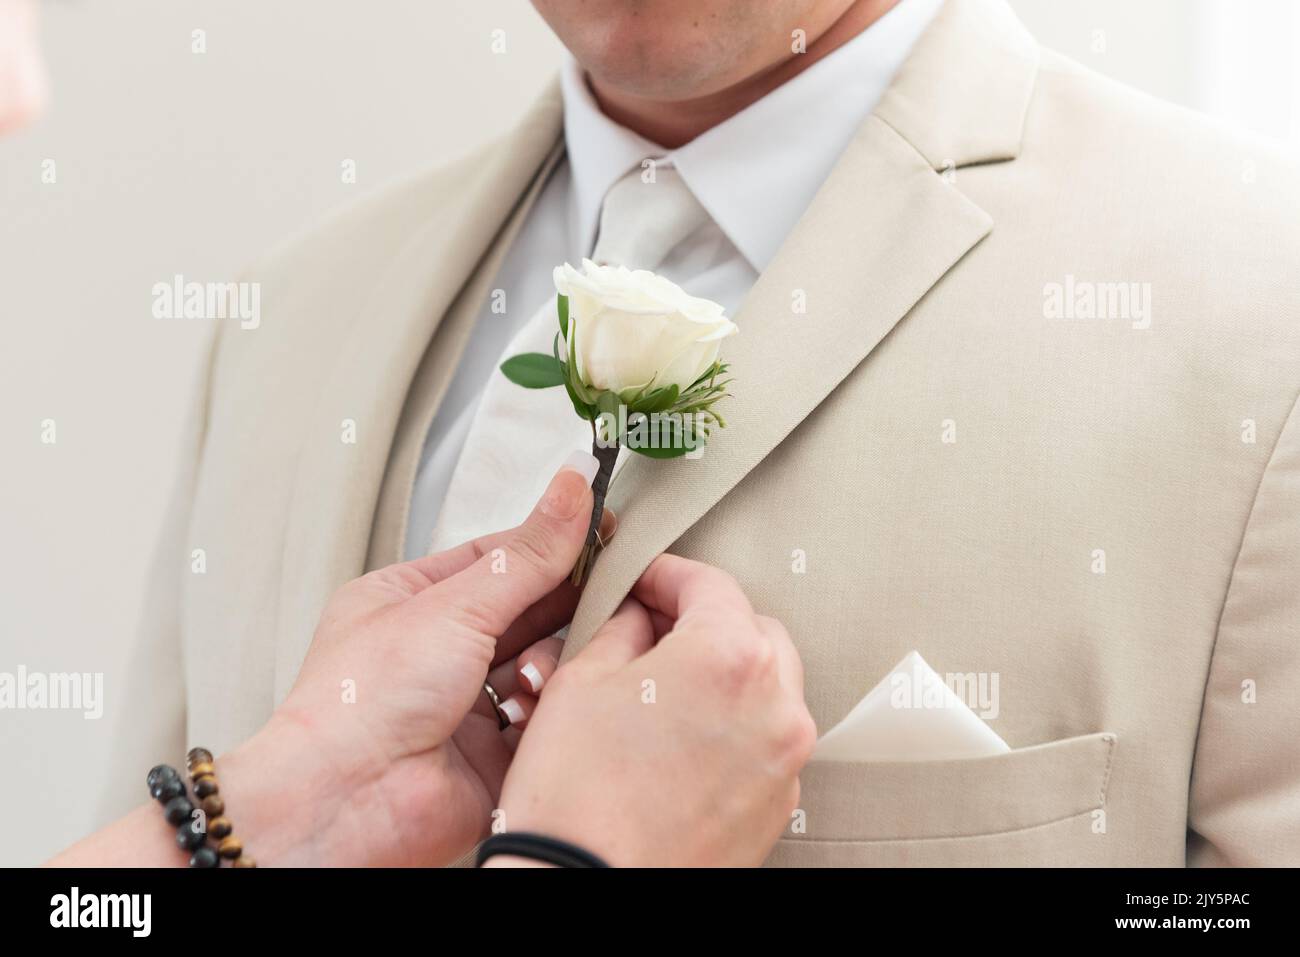 Groom has helping hands with manicure assisting him in pinning his flower rose boutonniere on the lapel of his suit. Stock Photo